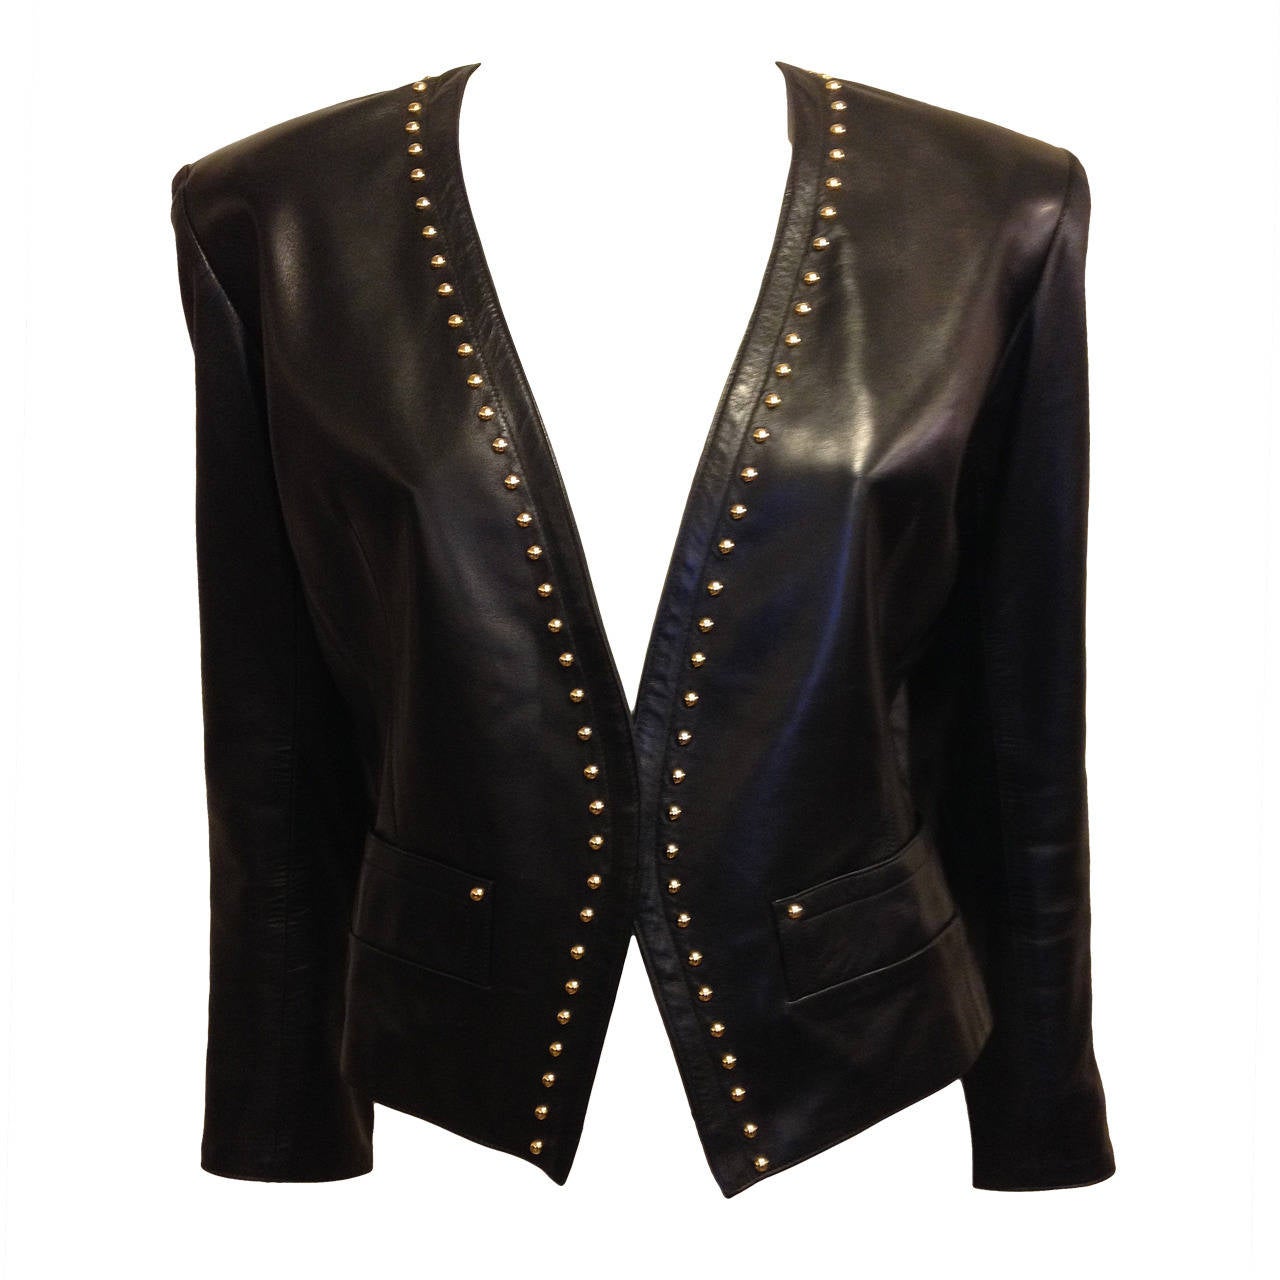 Yves Saint Laurent Jacket with Gold Studs